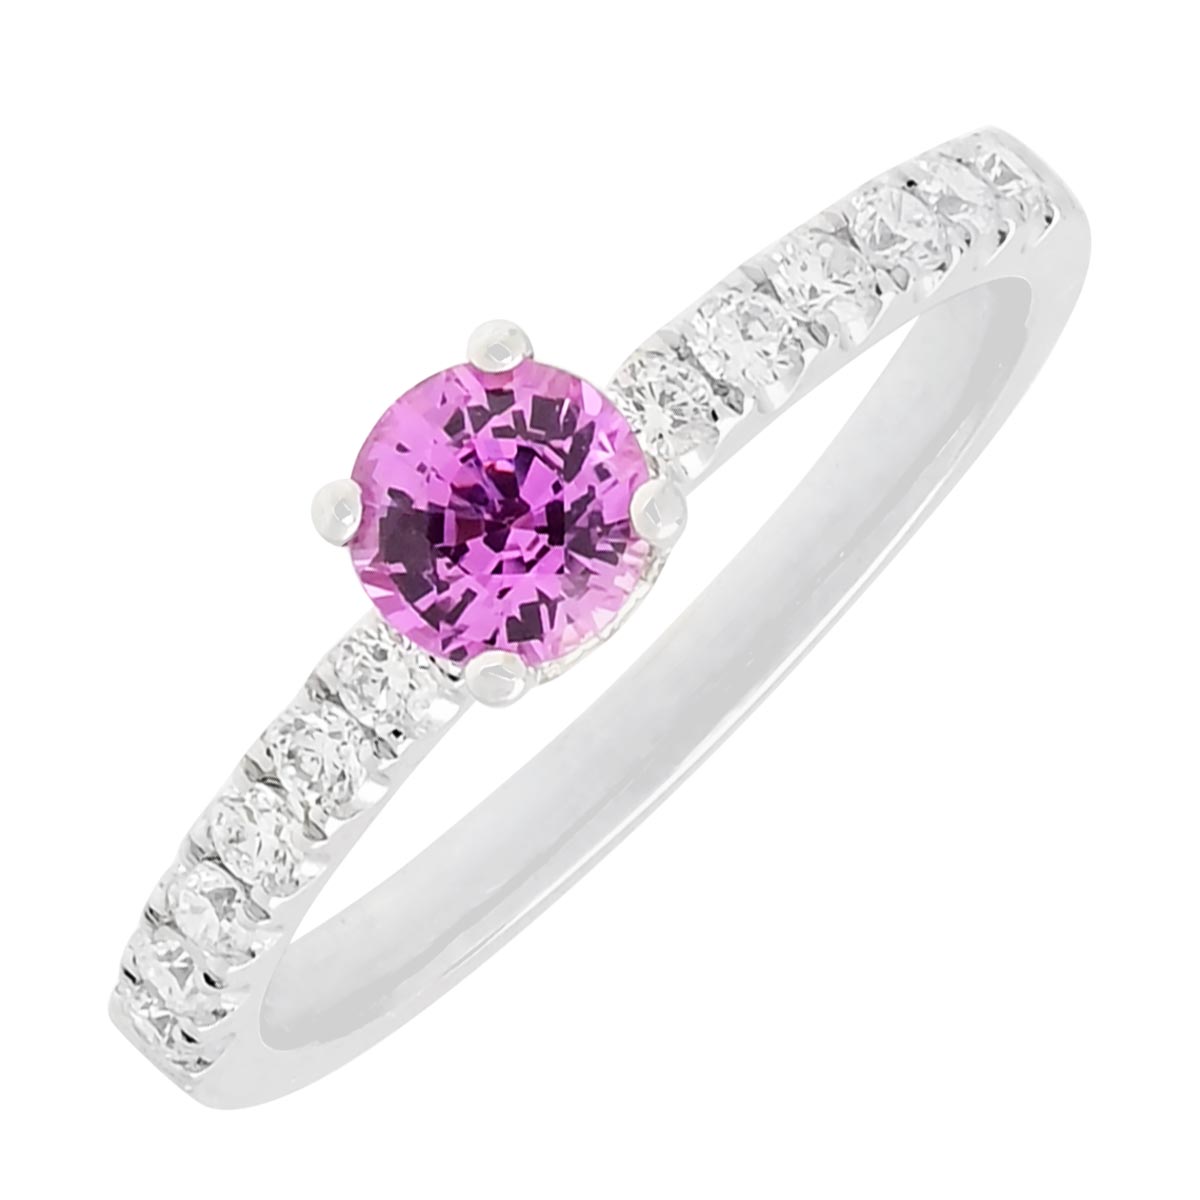 Pink Sapphire Ring in 14kt White Gold with Diamonds (1/3ct tw)